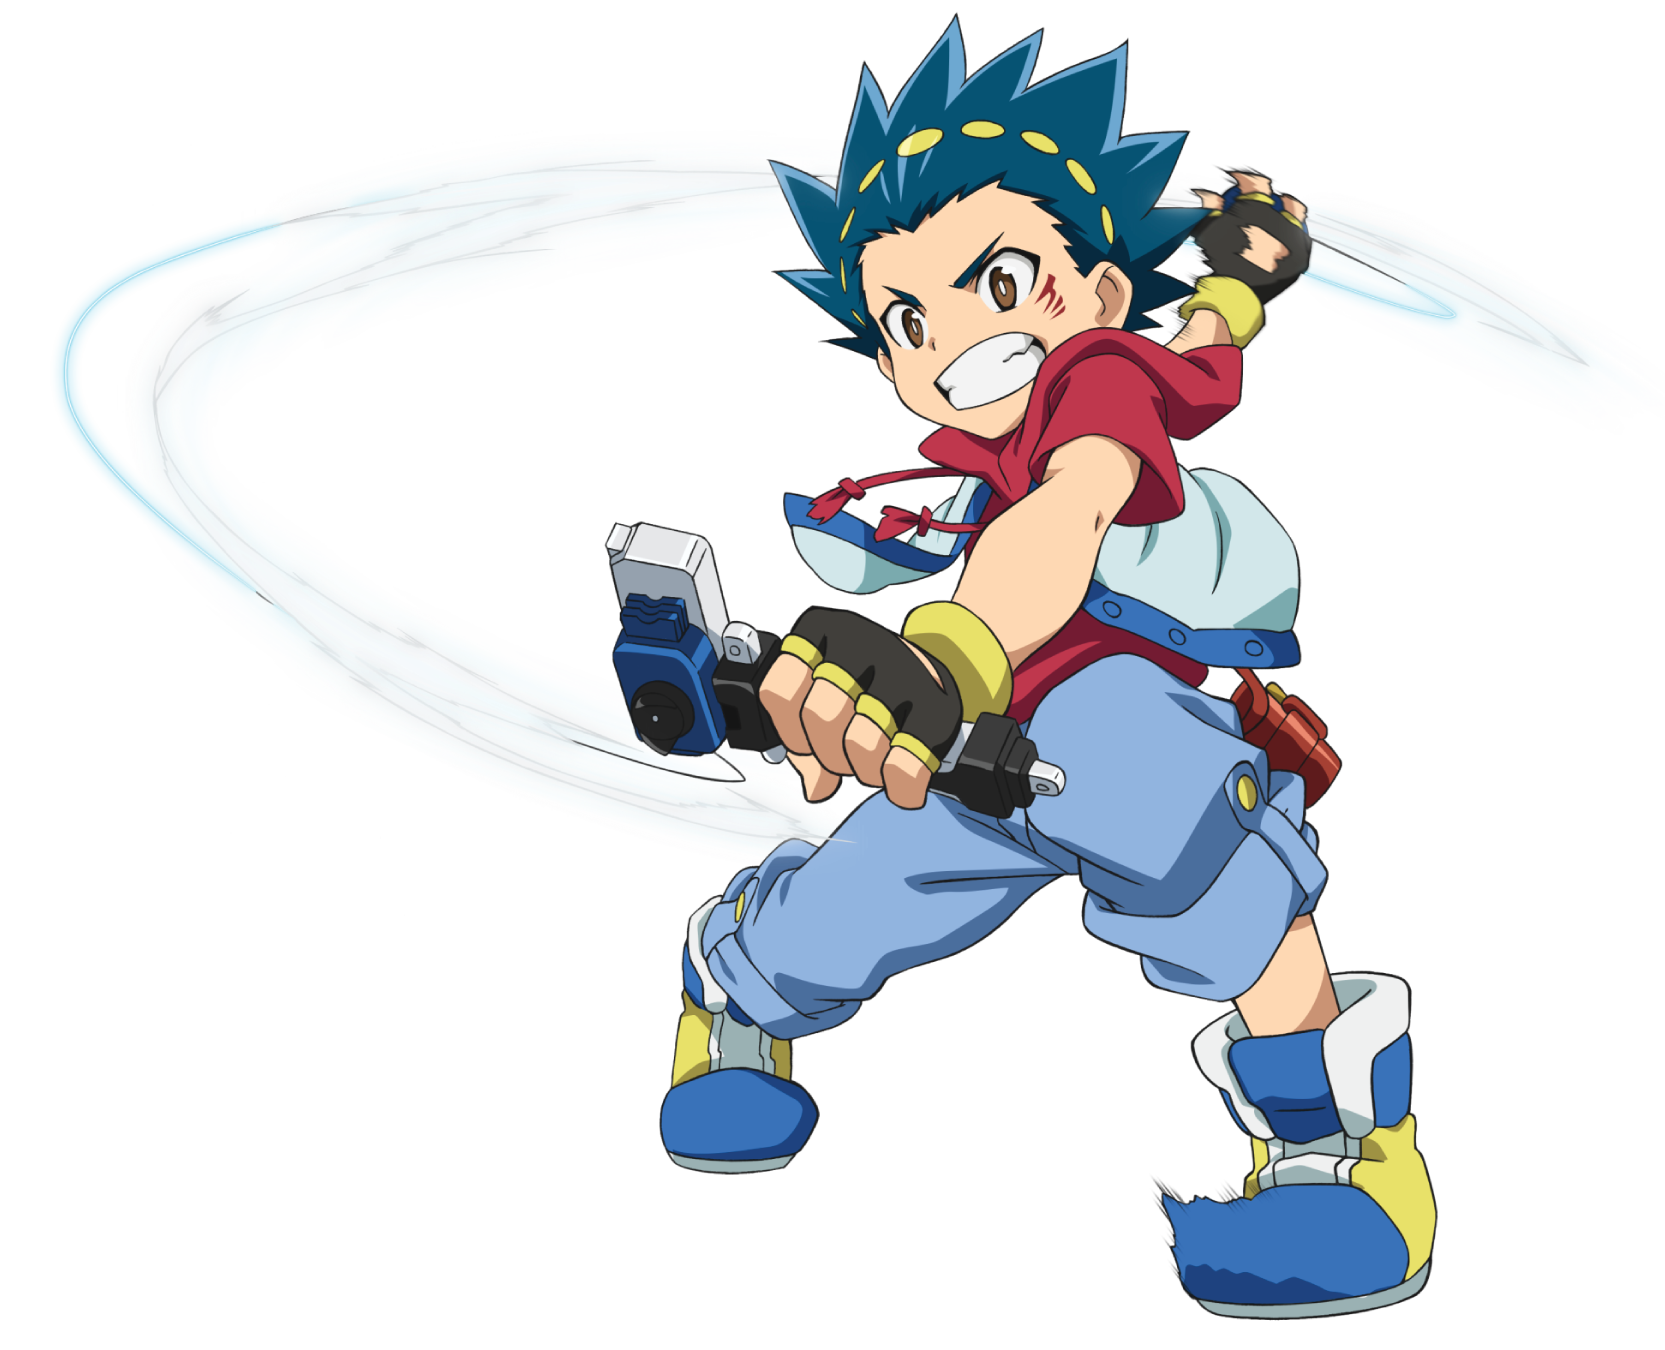 Toy Beyblade: Metal Spinning Youtube Fusion Tops PNG Image